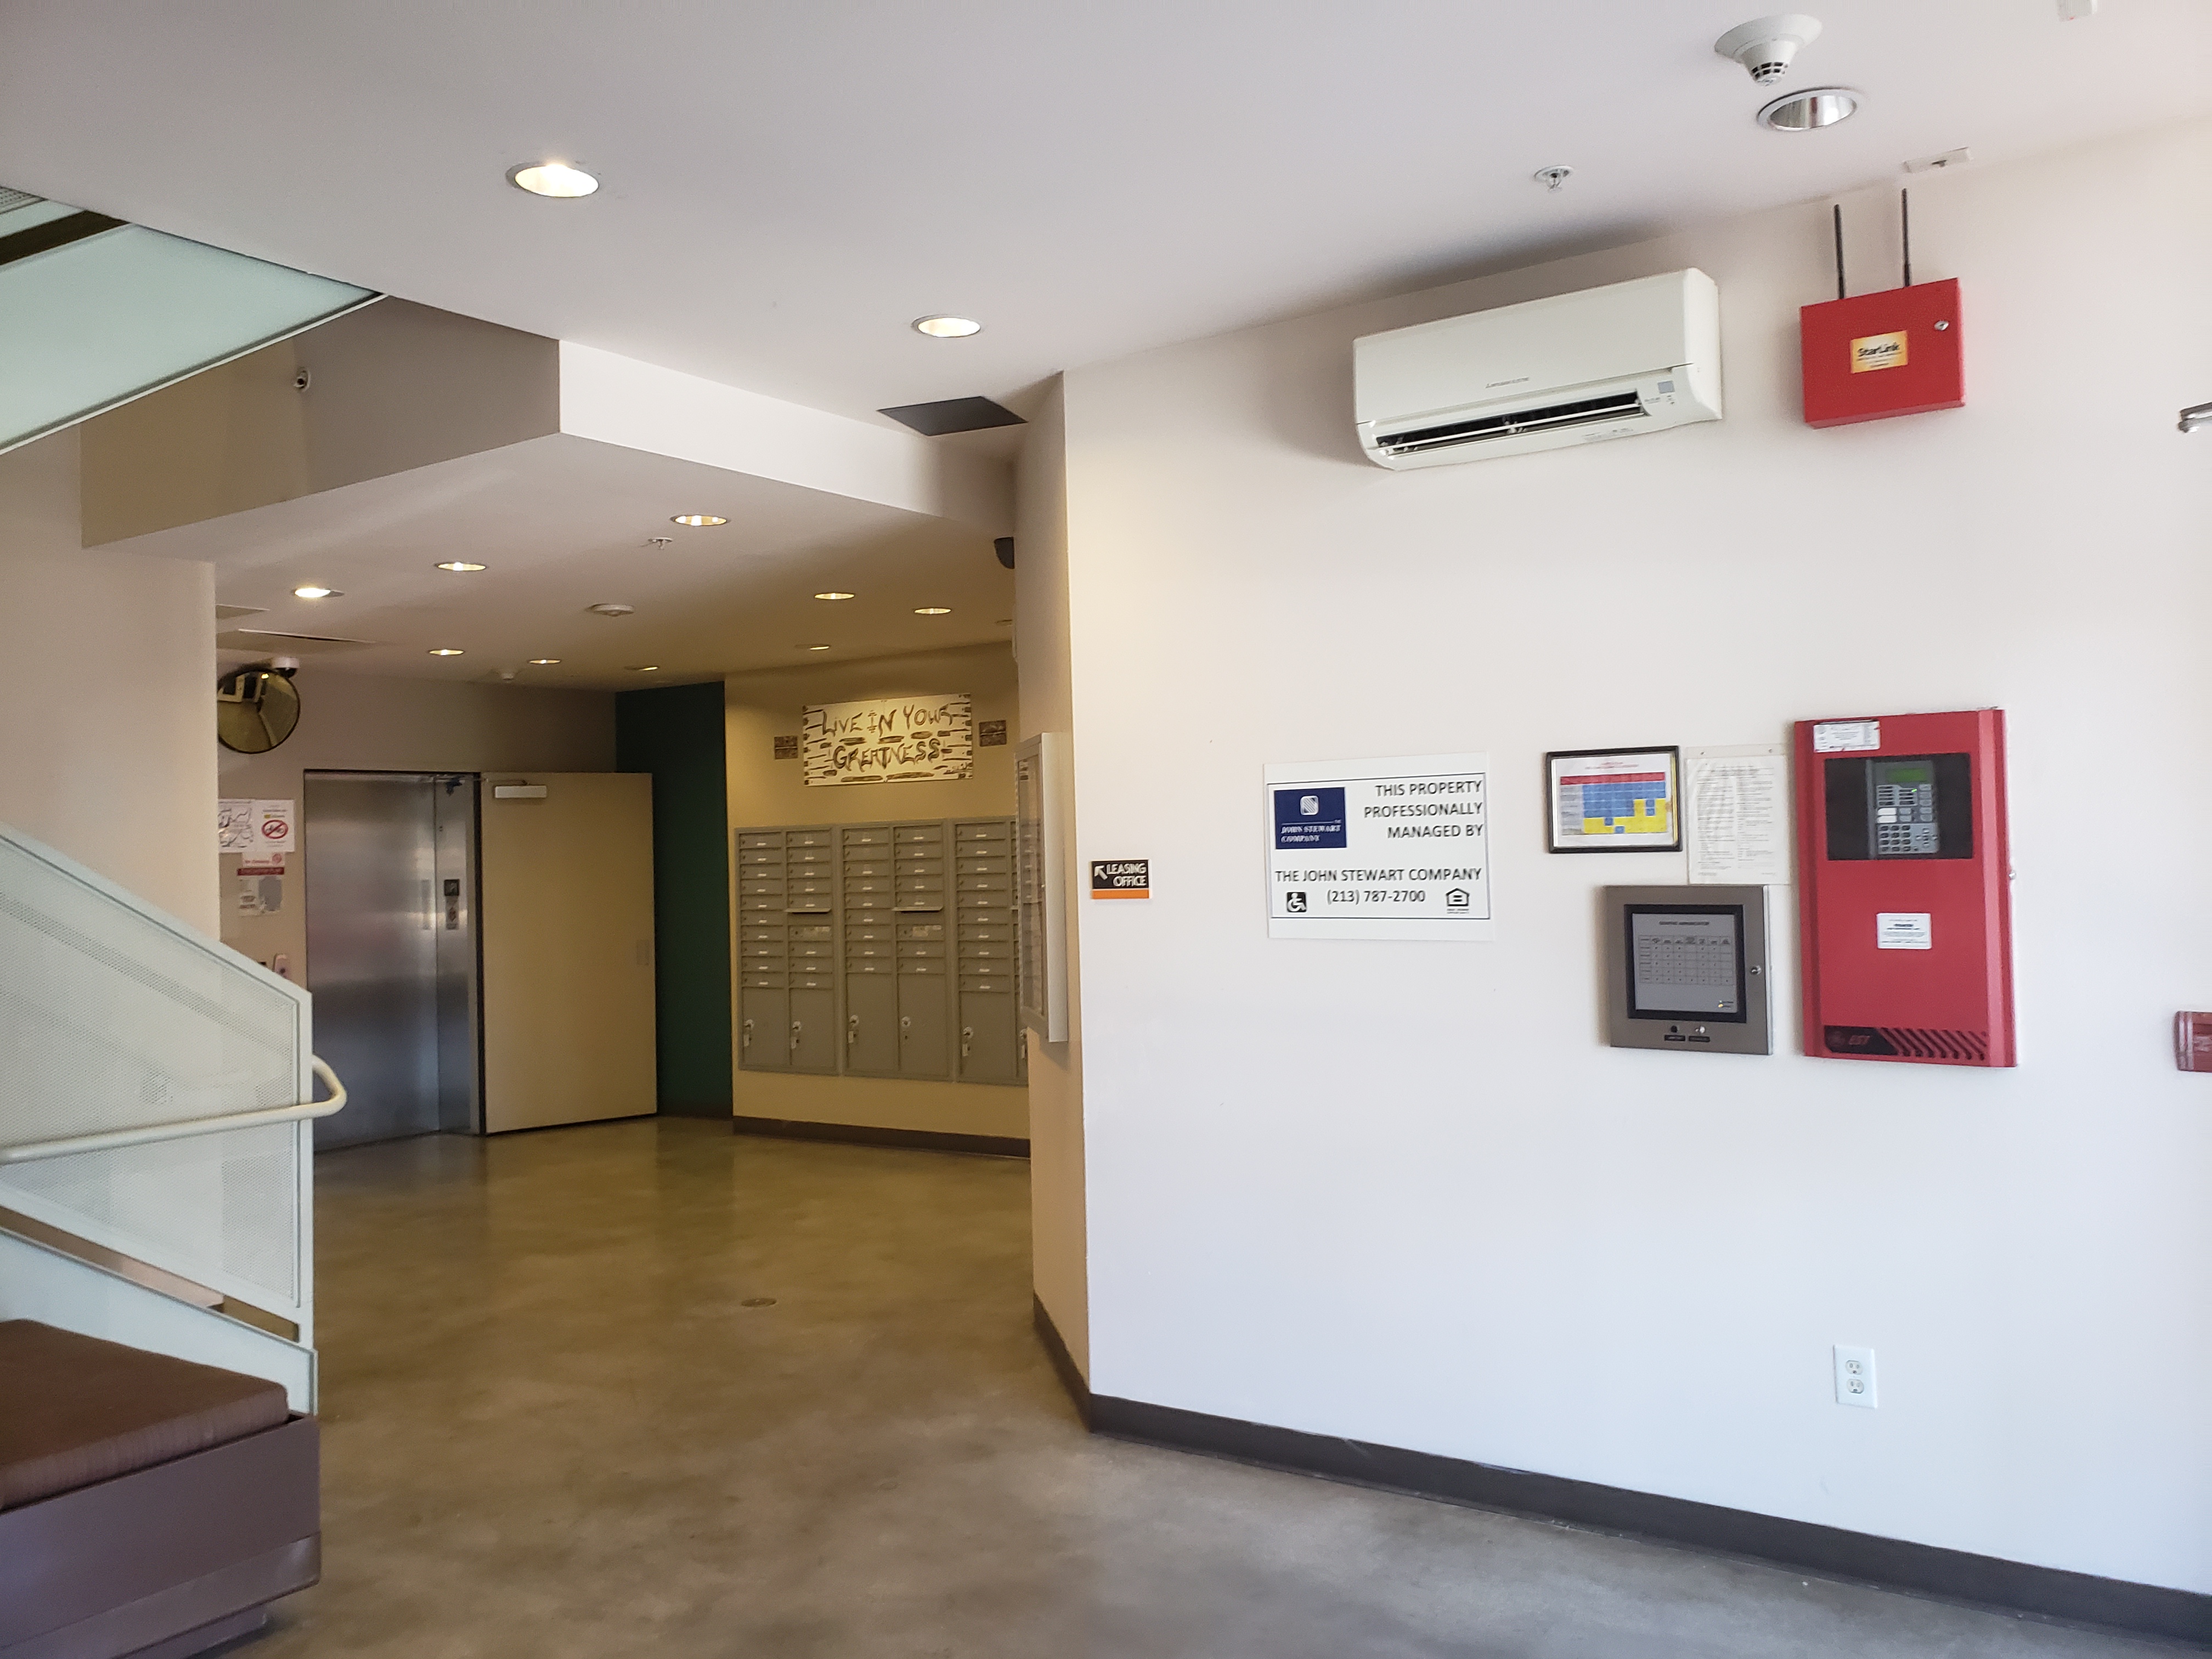 Image of lobby with access to staris and elevator. Mailboxes
along wall near elevator